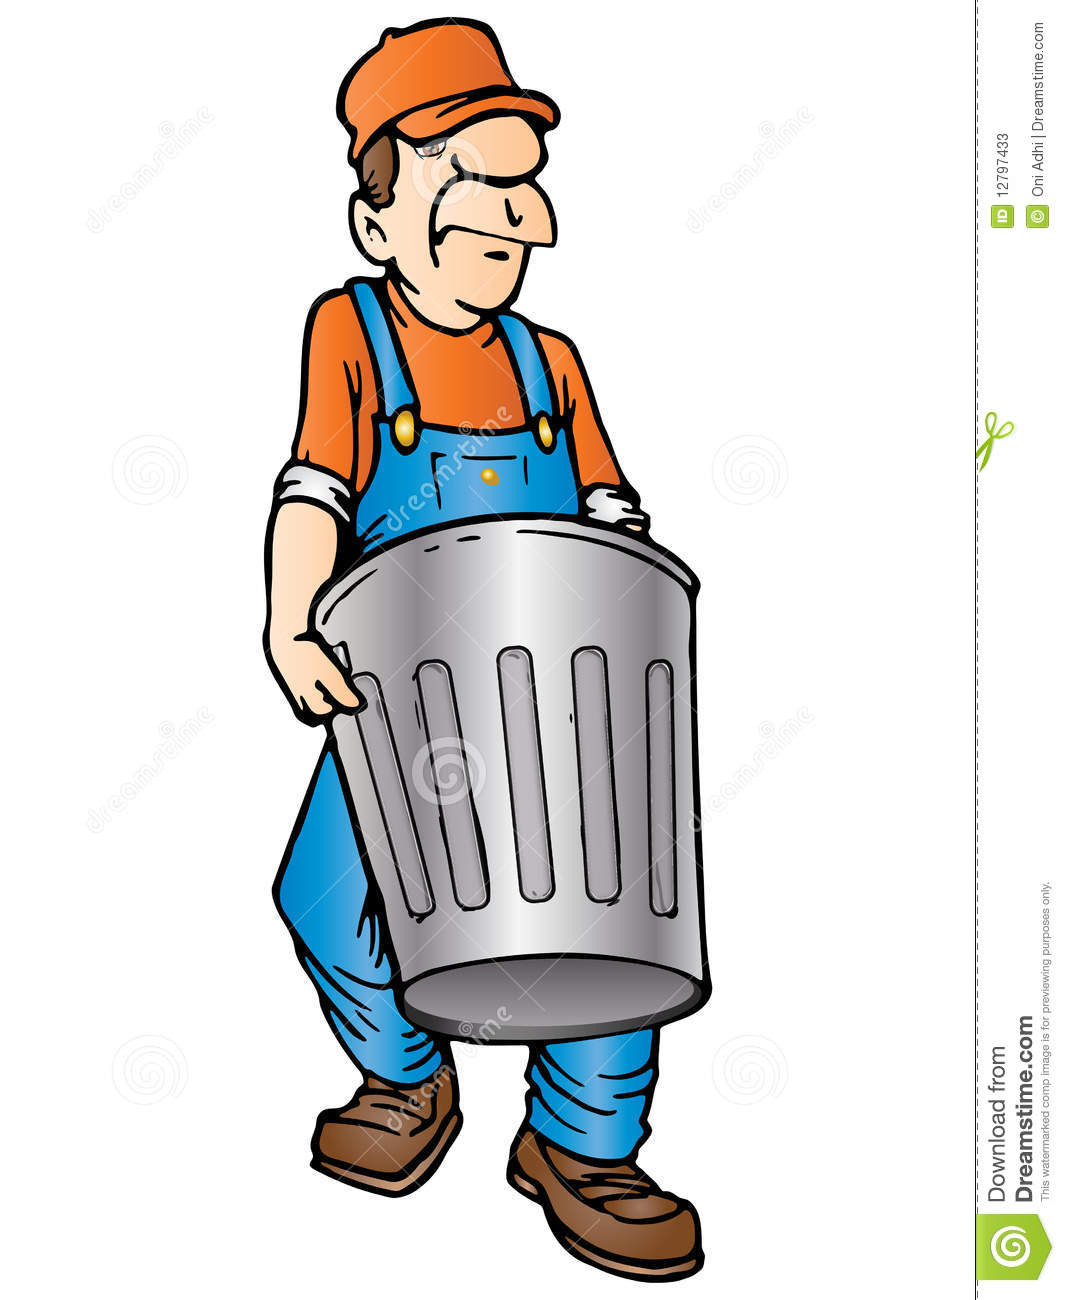 Garbage collector clipart.